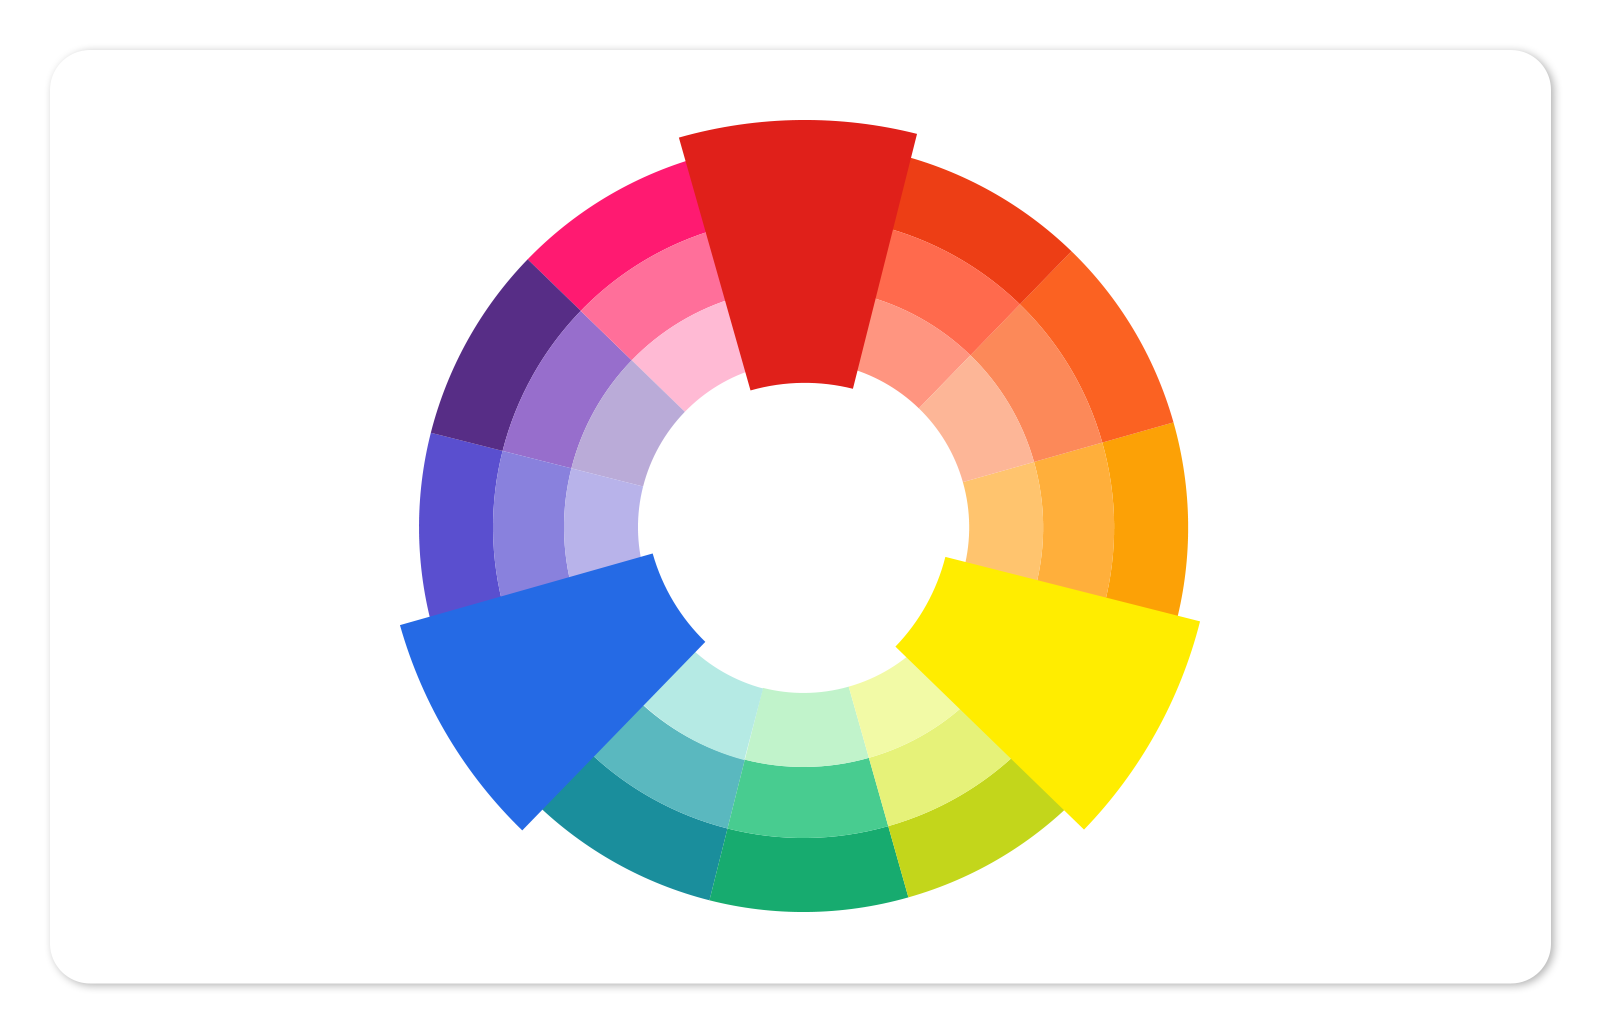 The color blocks represent white, tan, yellow, orange, red, pink, purple,  blue, green, brown, gray and black.